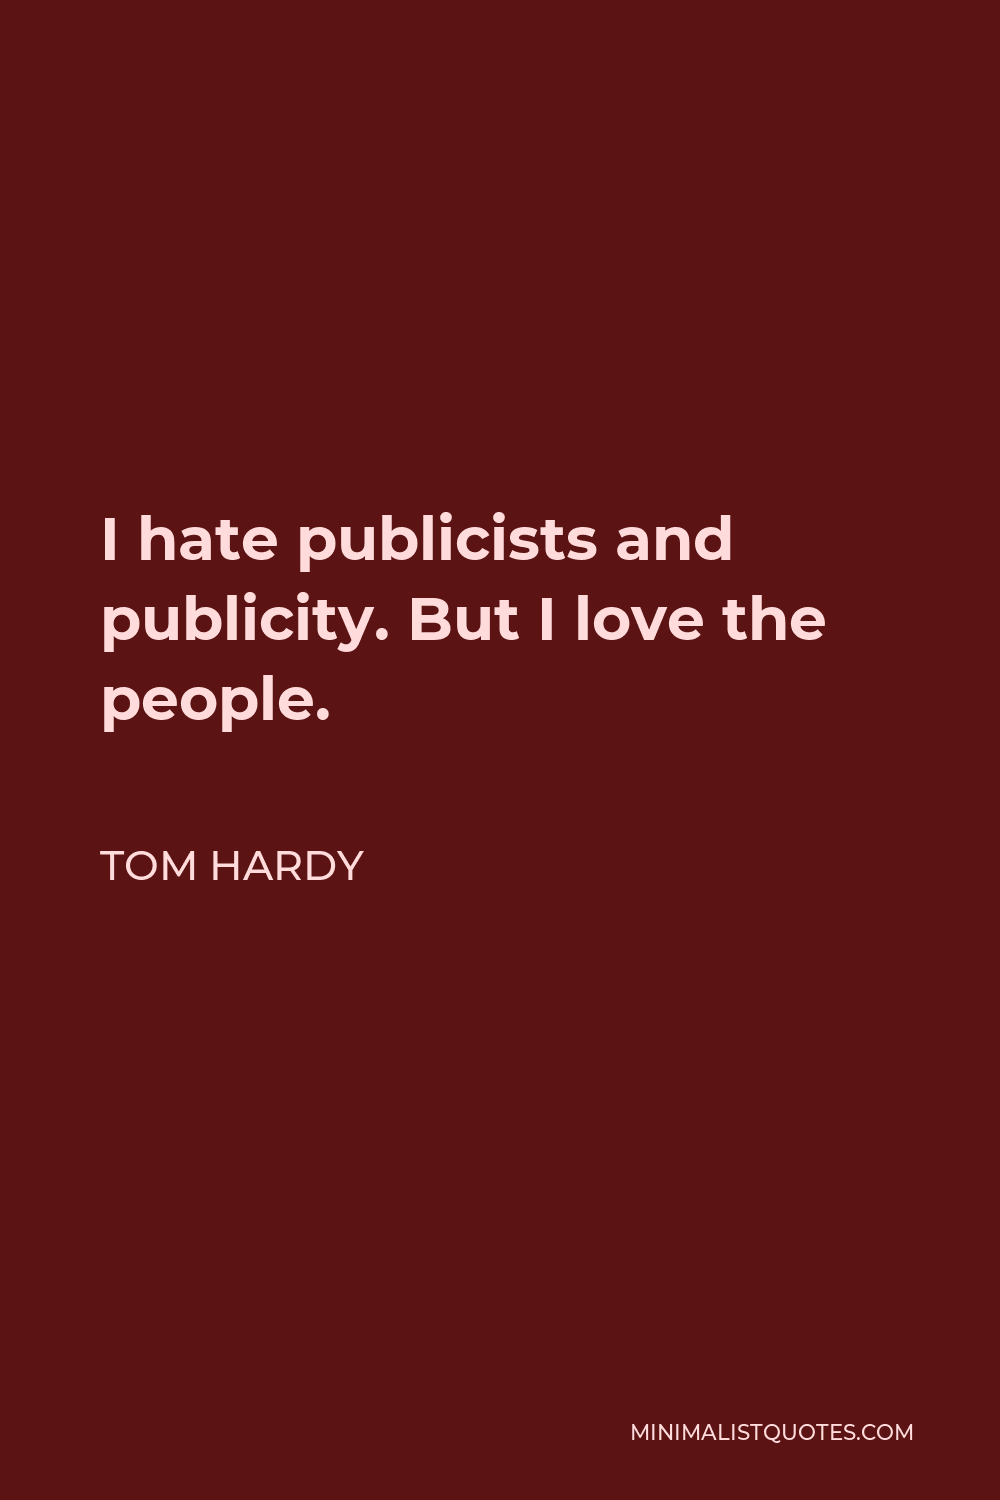 Tom Hardy Quote - I hate publicists and publicity. But I love the people.